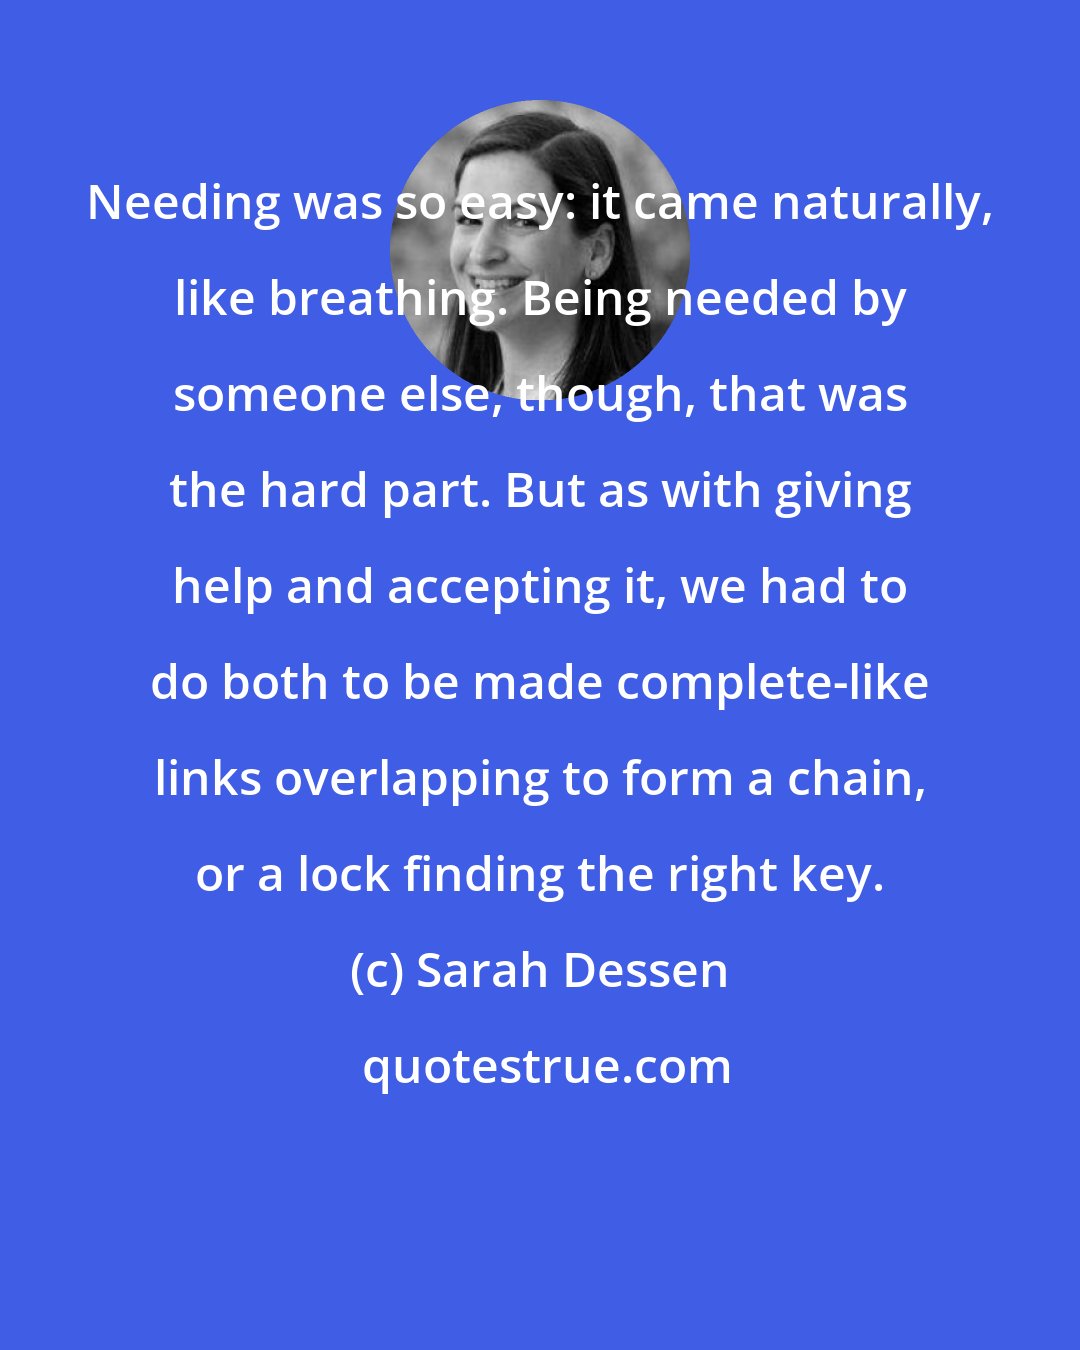 Sarah Dessen: Needing was so easy: it came naturally, like breathing. Being needed by someone else, though, that was the hard part. But as with giving help and accepting it, we had to do both to be made complete-like links overlapping to form a chain, or a lock finding the right key.